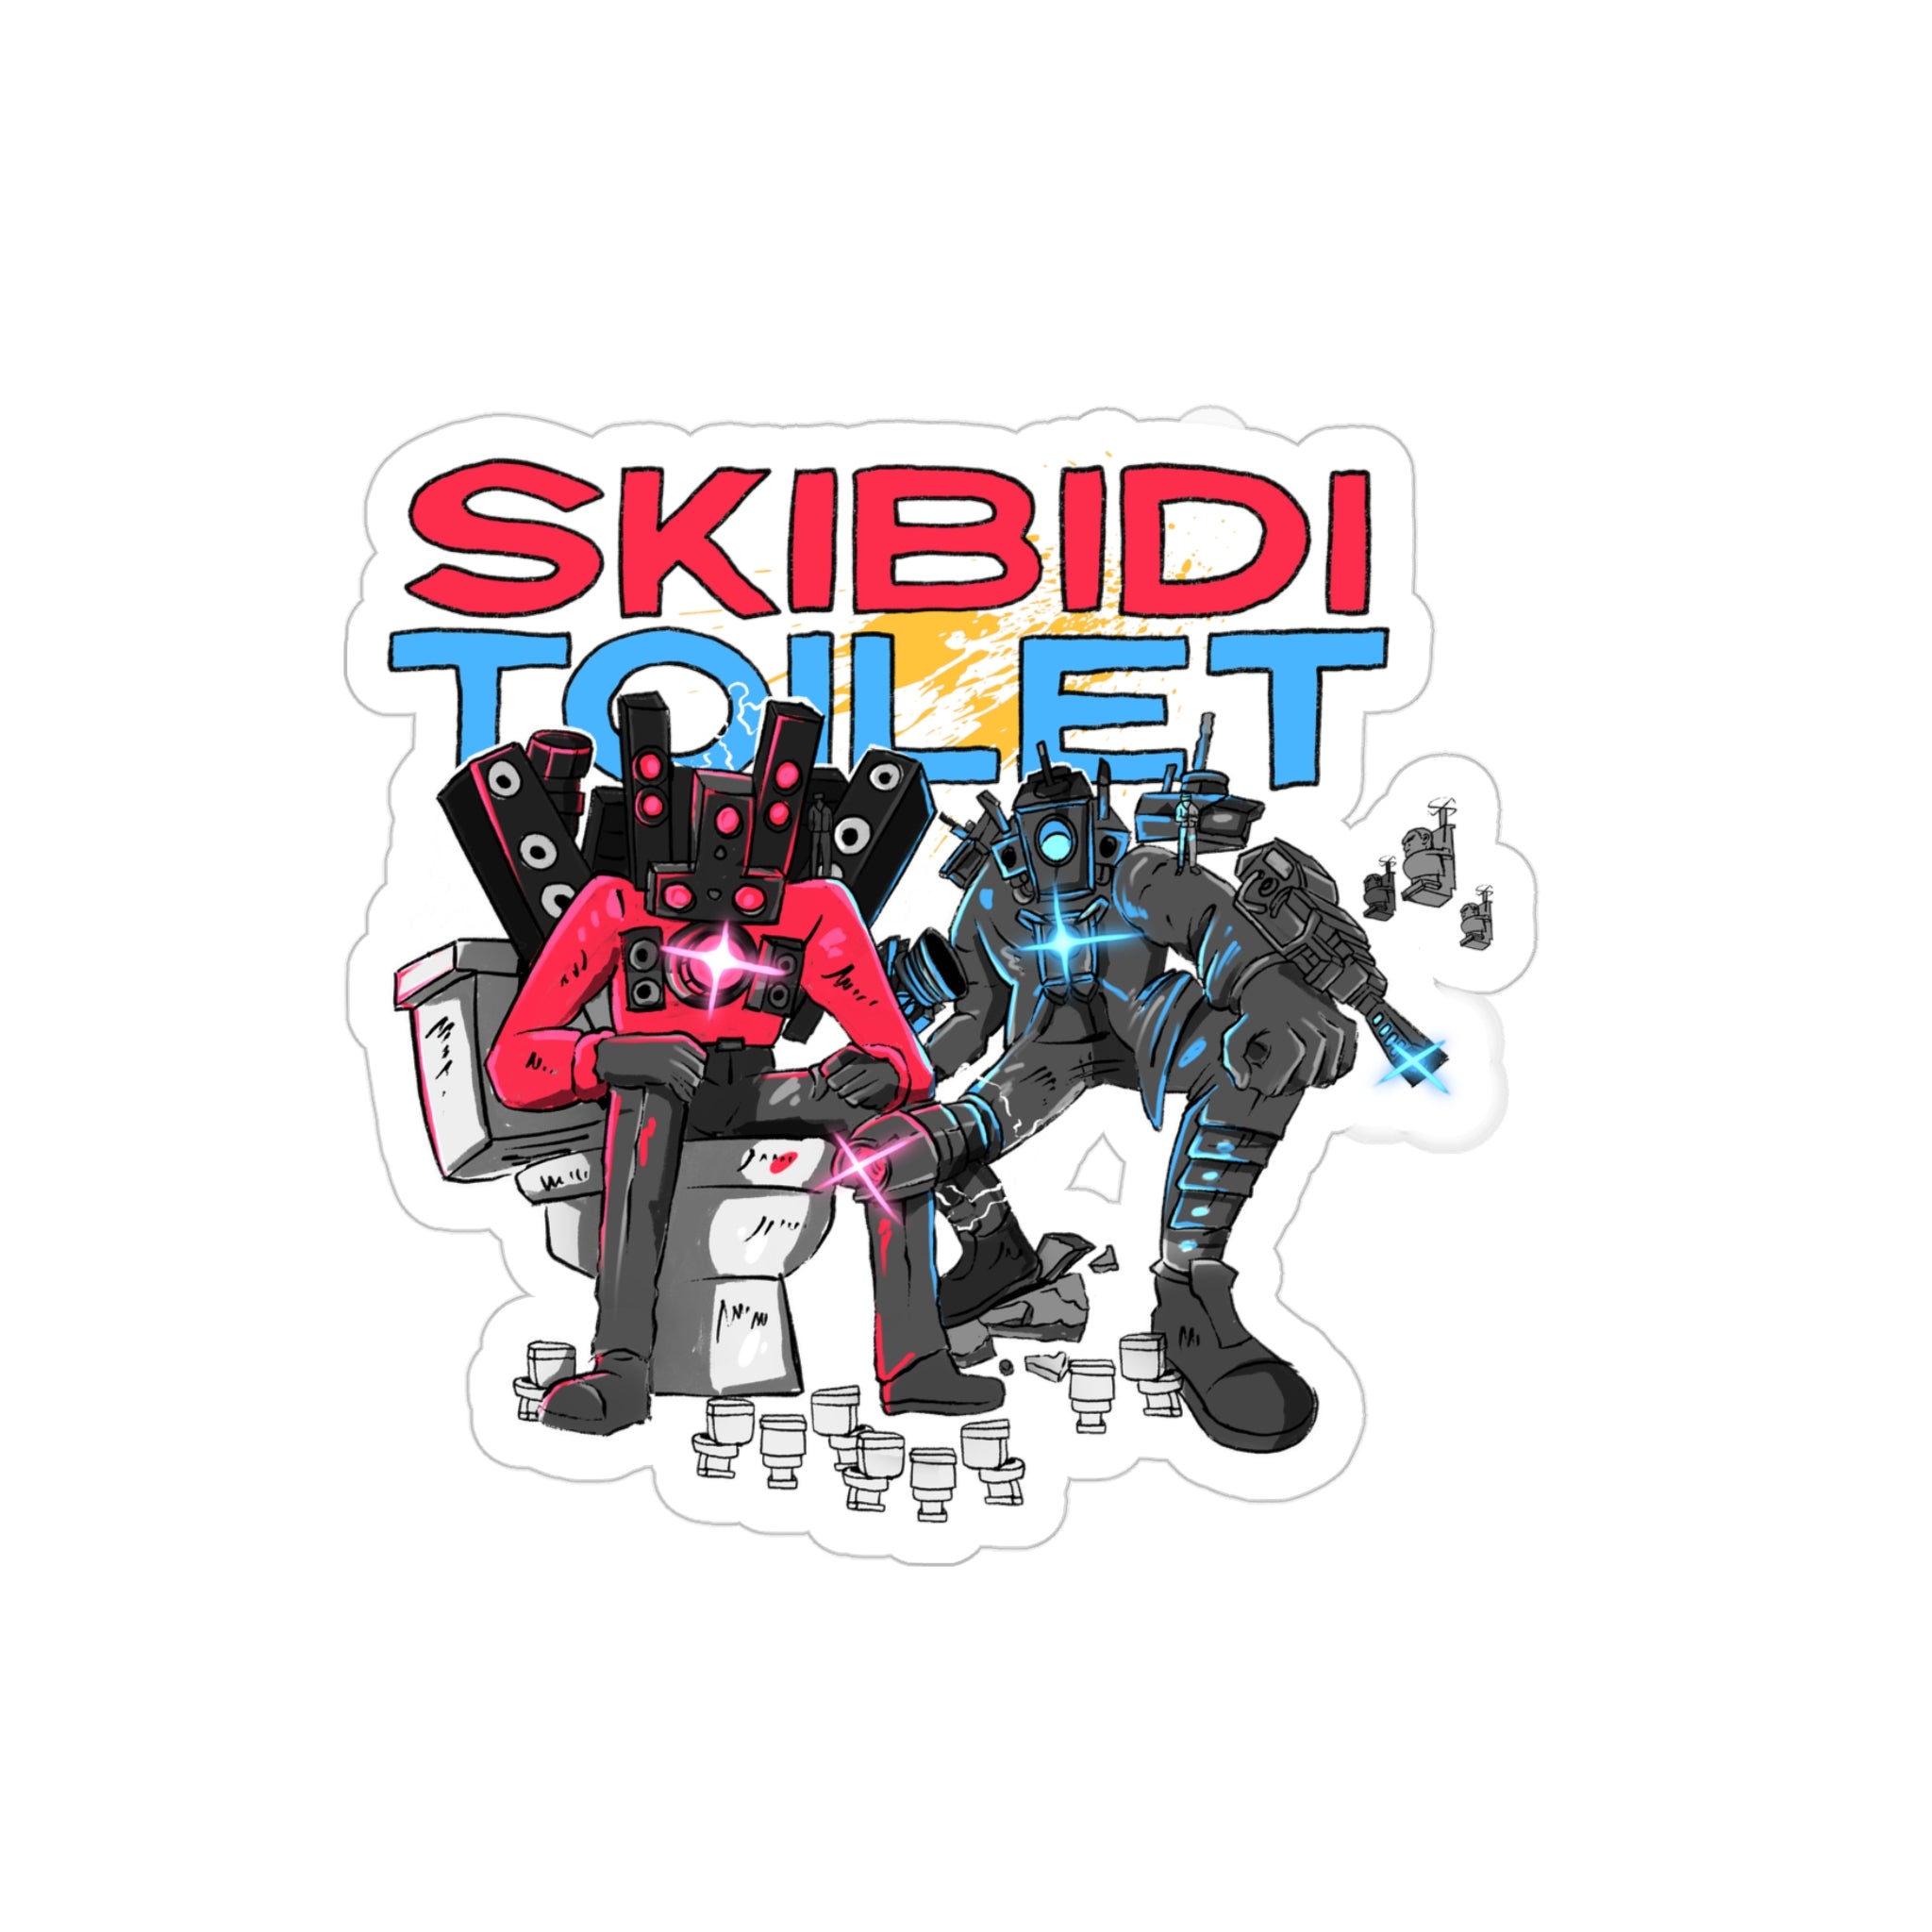 Titan duo surrounded by toilets sticker, white